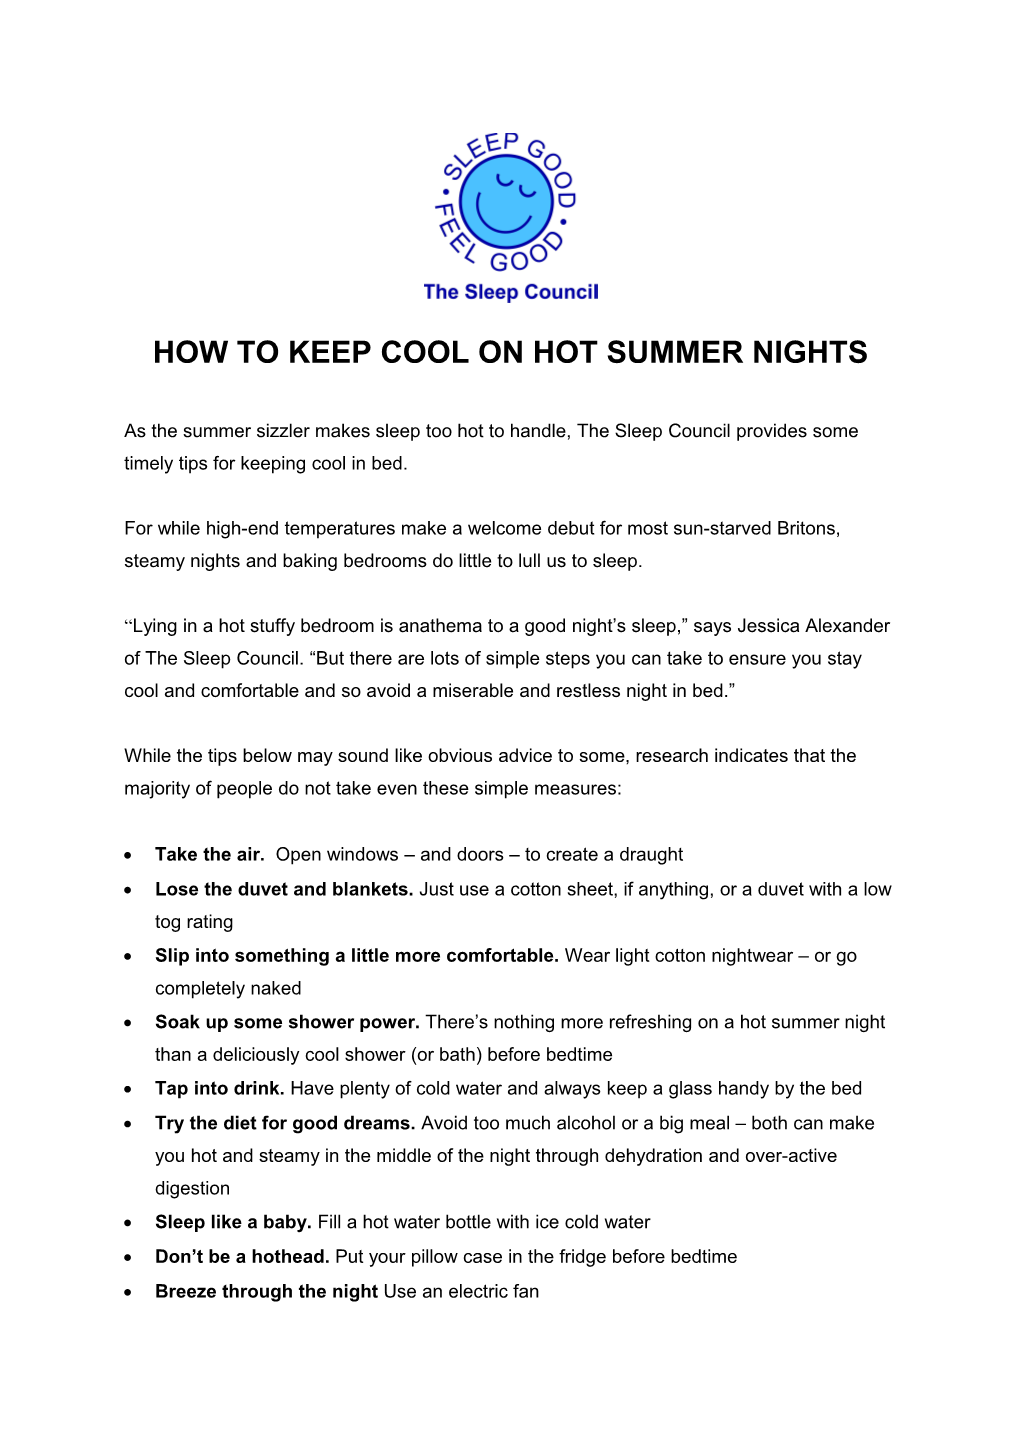 How to Keep Cool on Hot Summer Nights